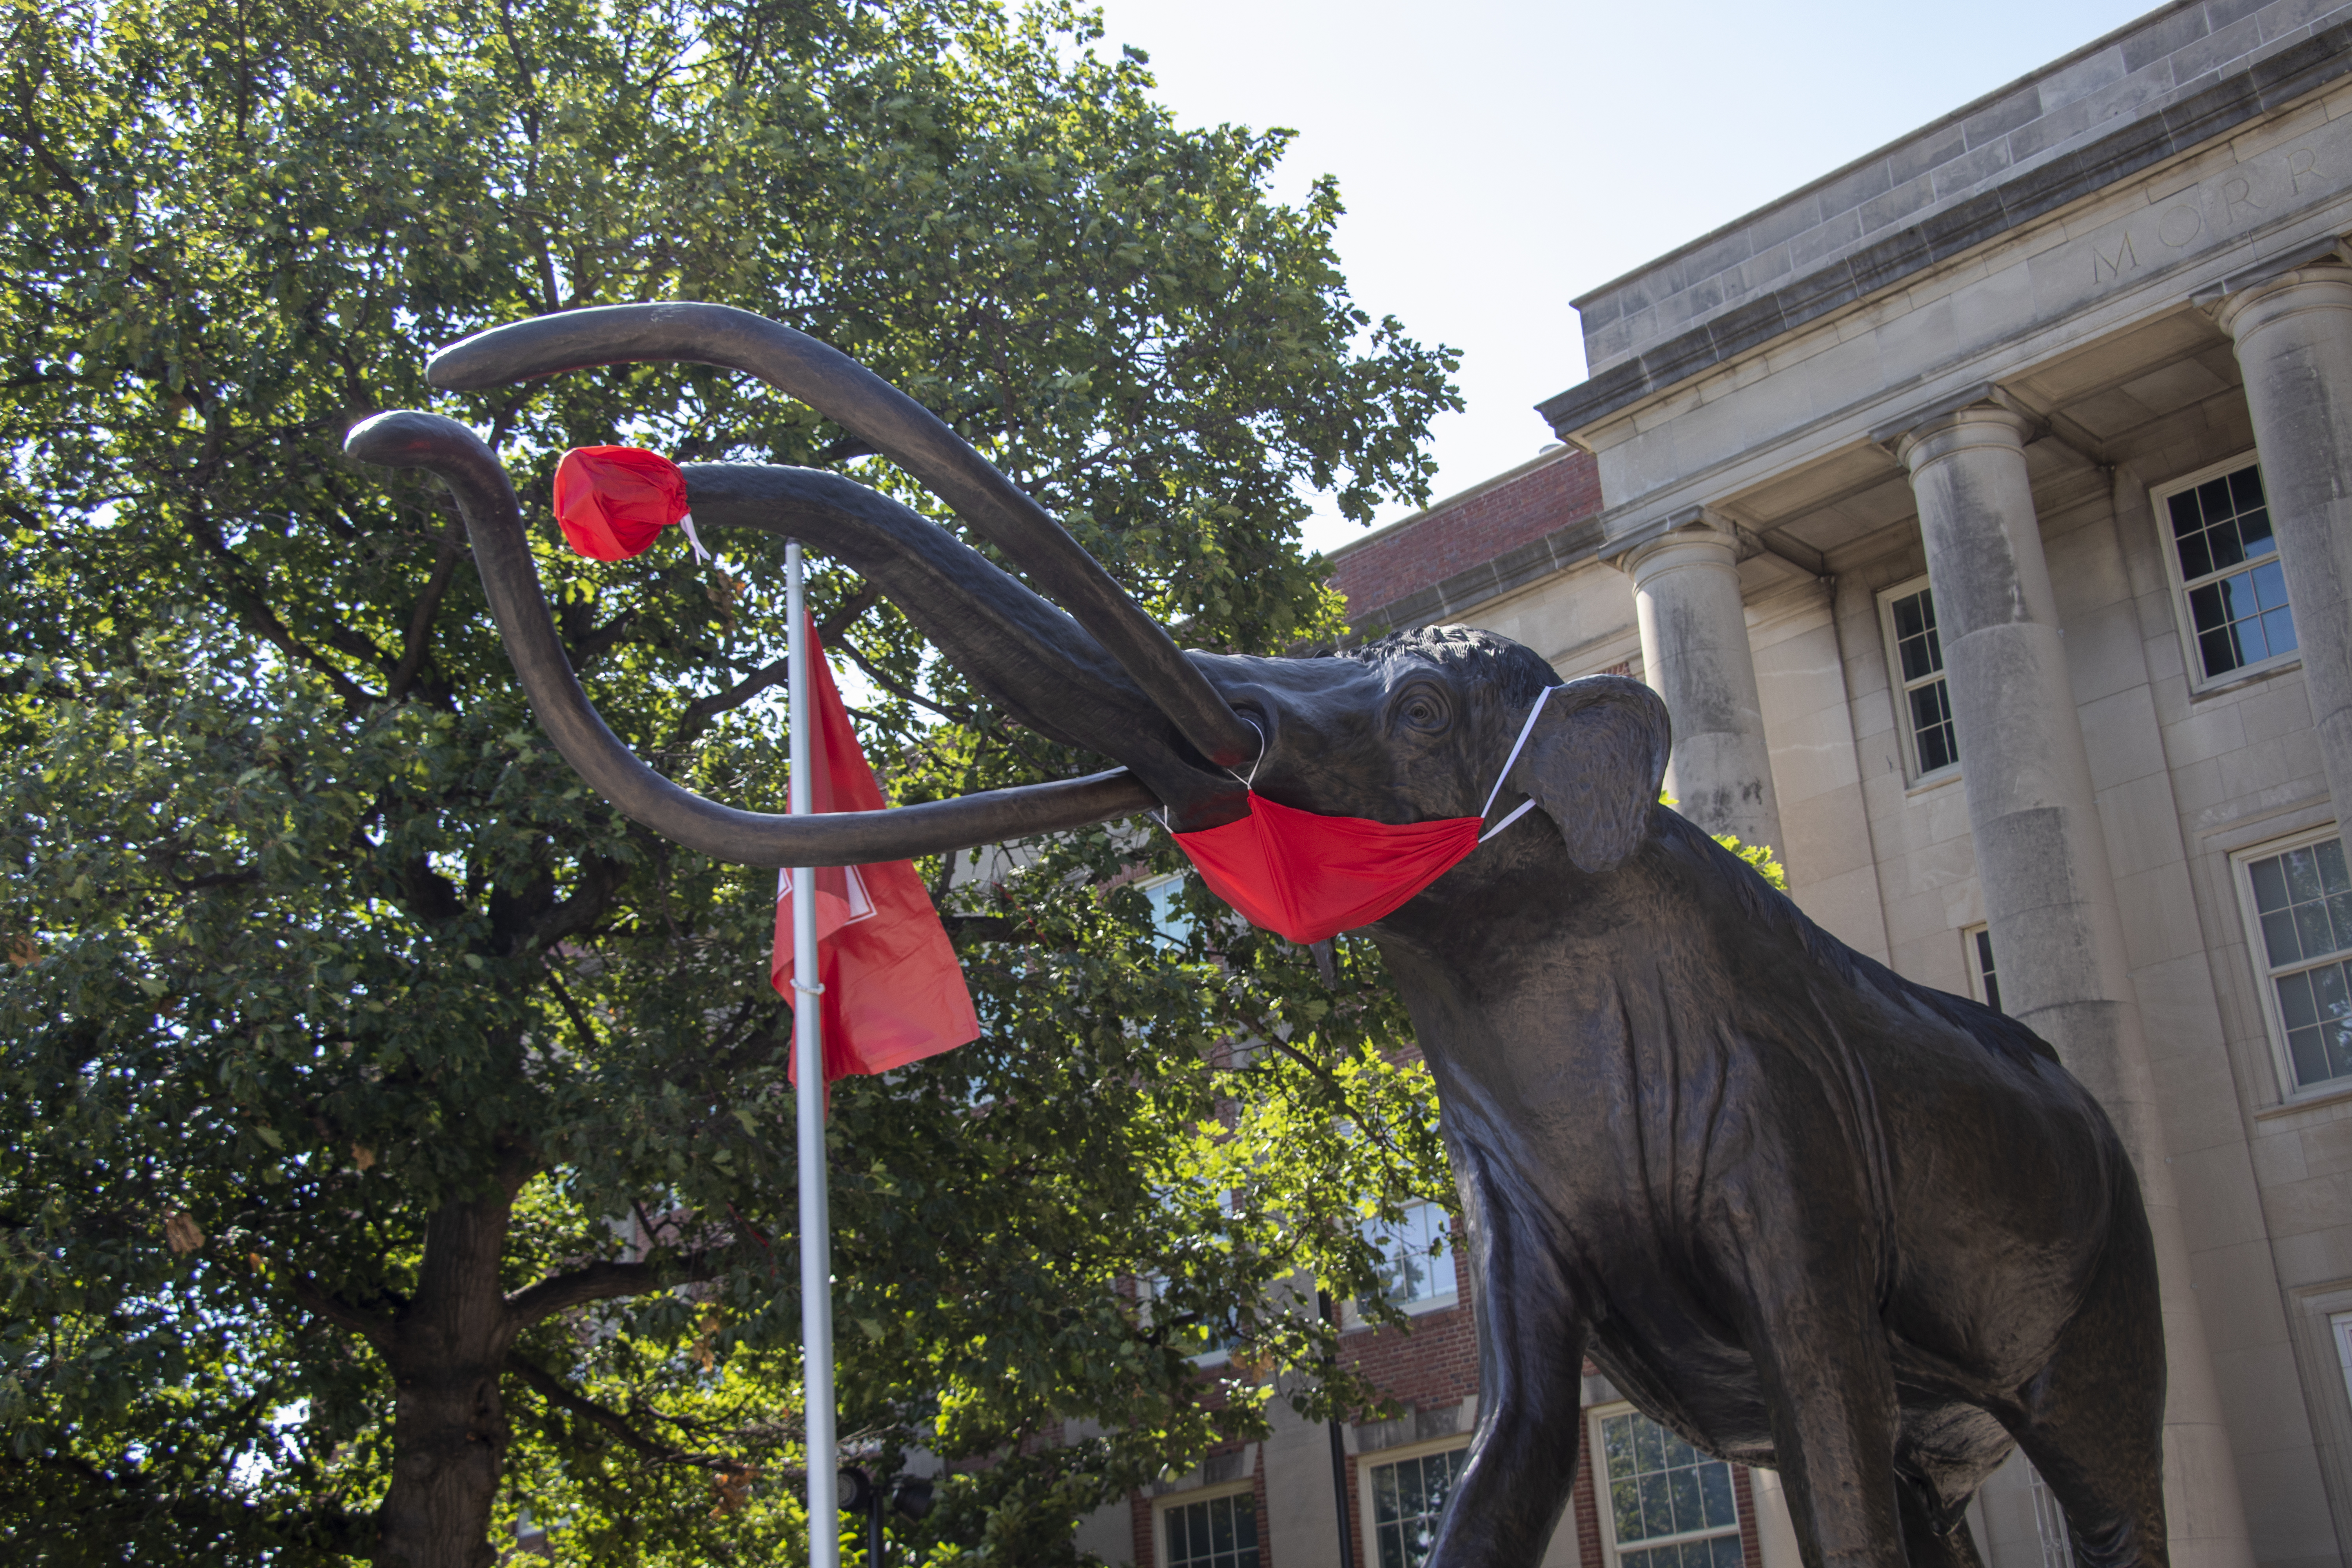 Archie, the woolly mammoth statue outside Morrill Hall, wears a red face covering on his trunk and mouth.